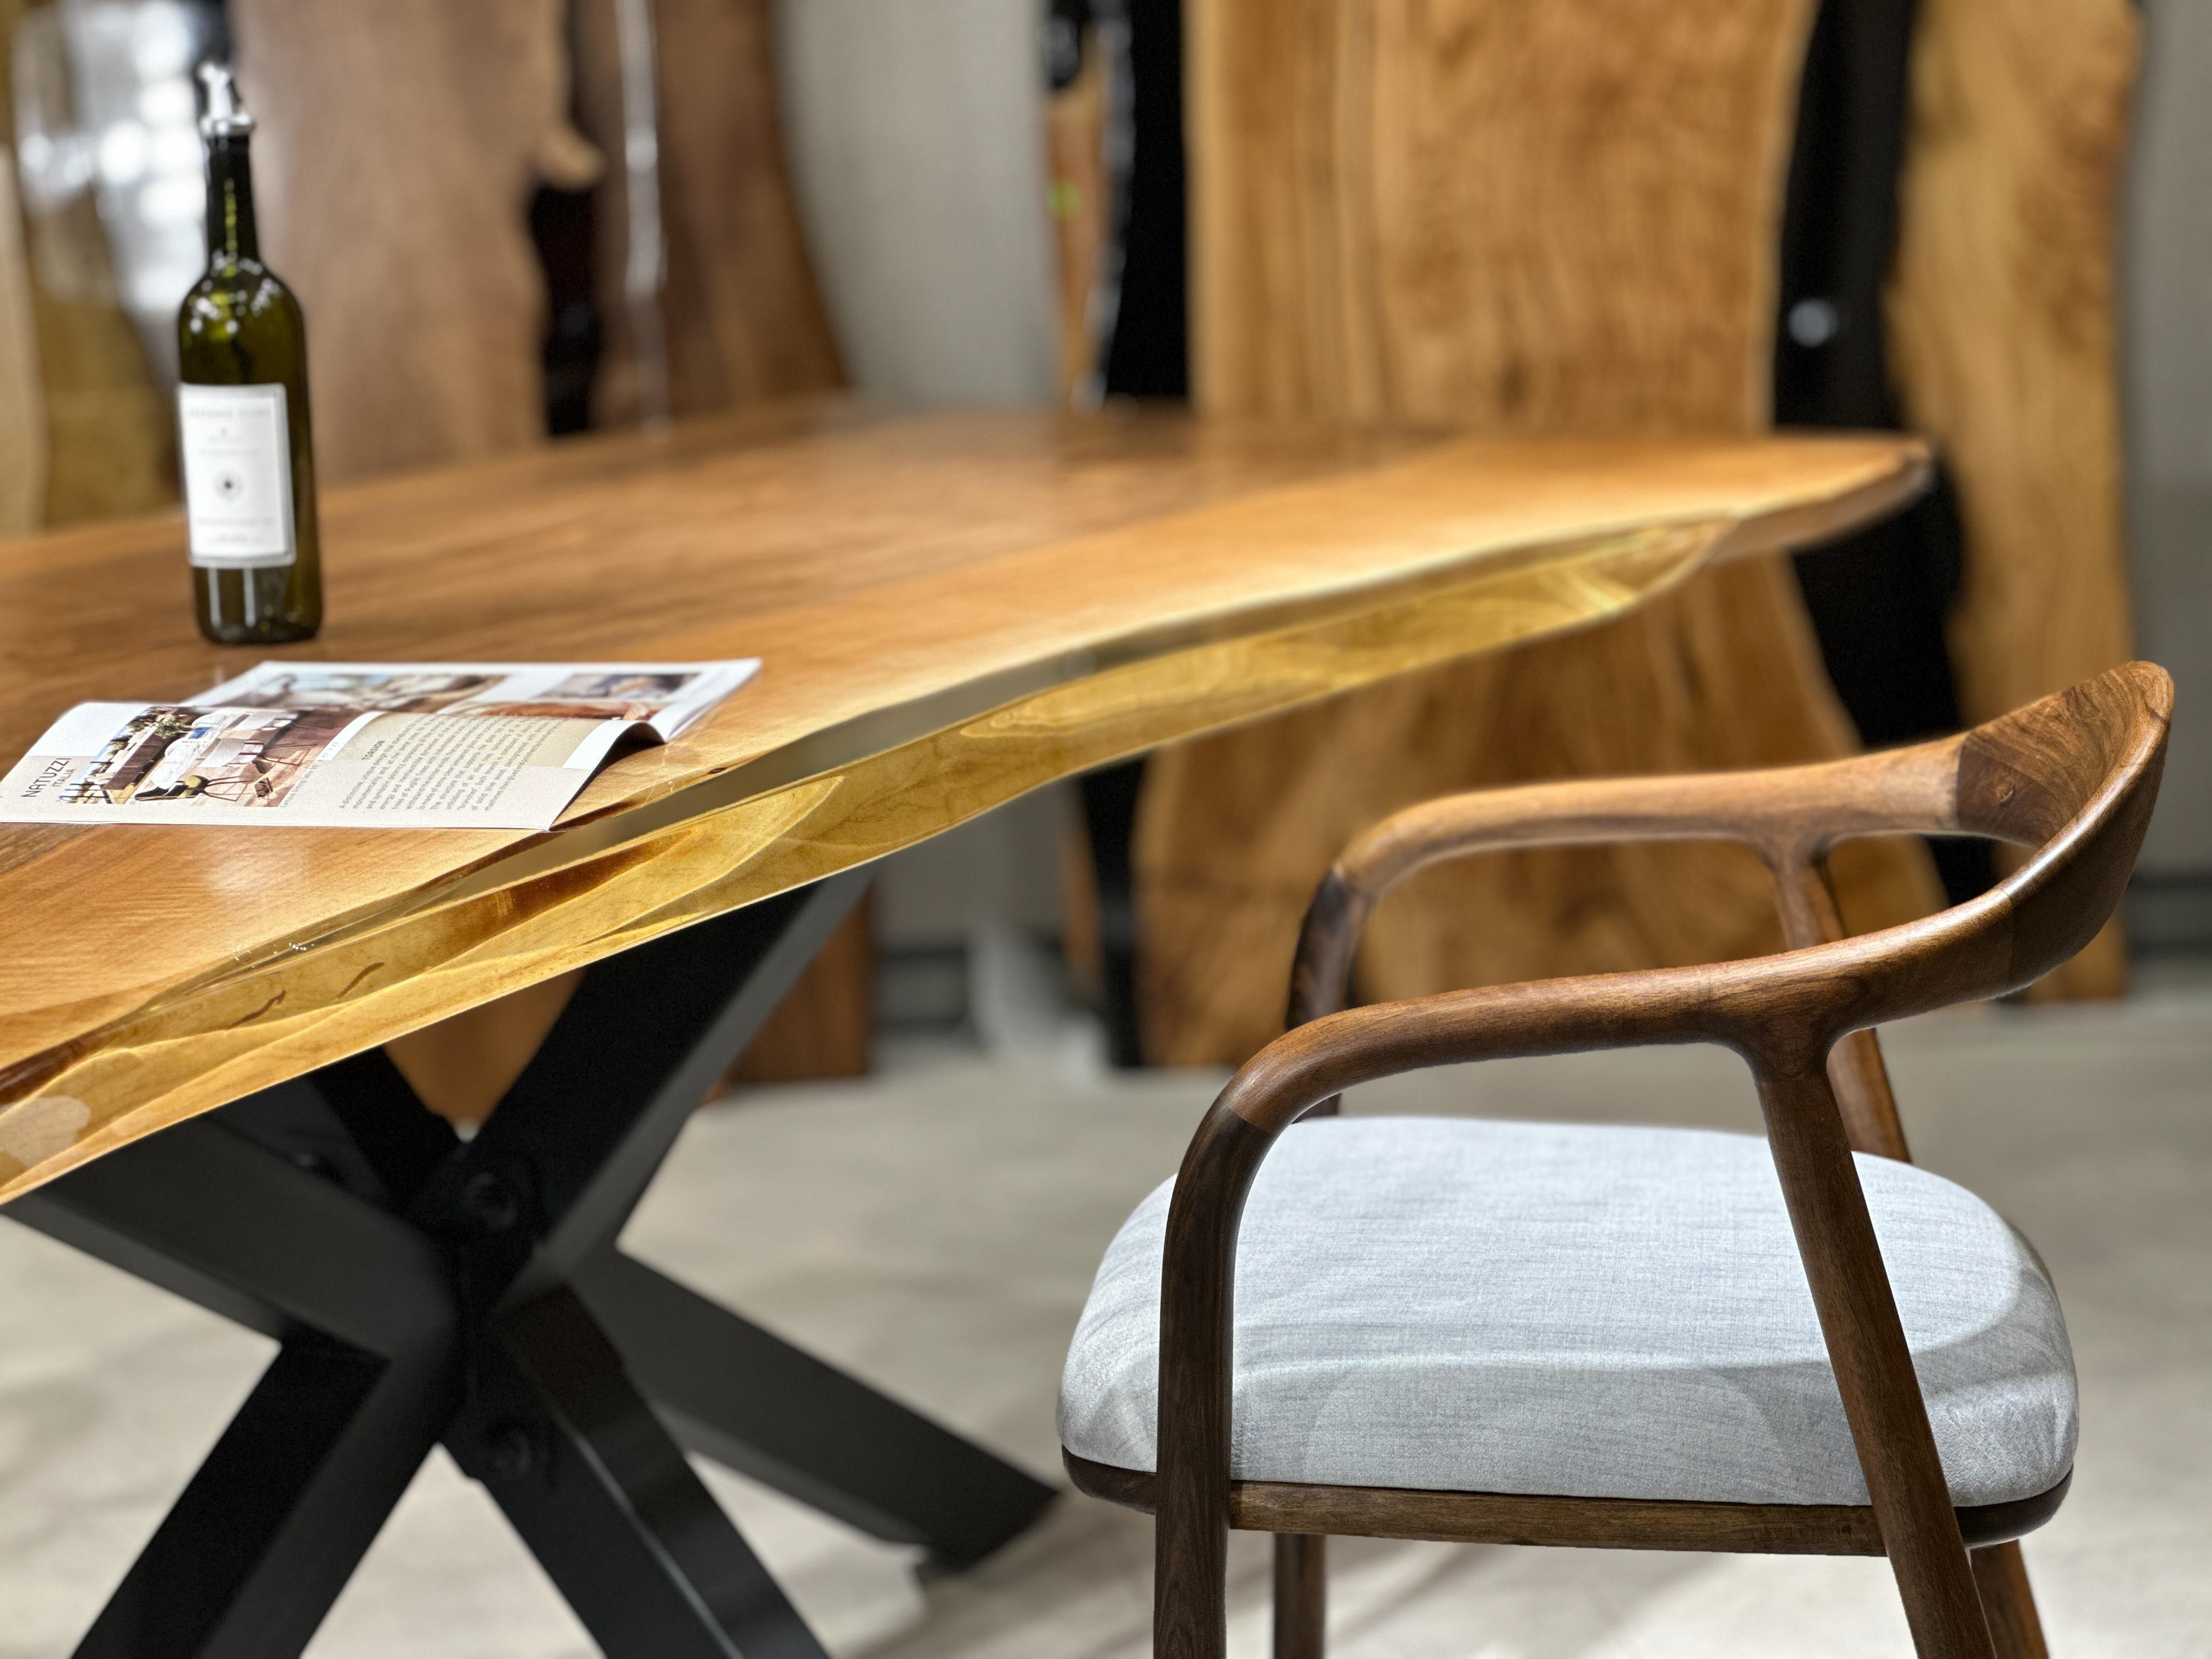 one piece wood dining table